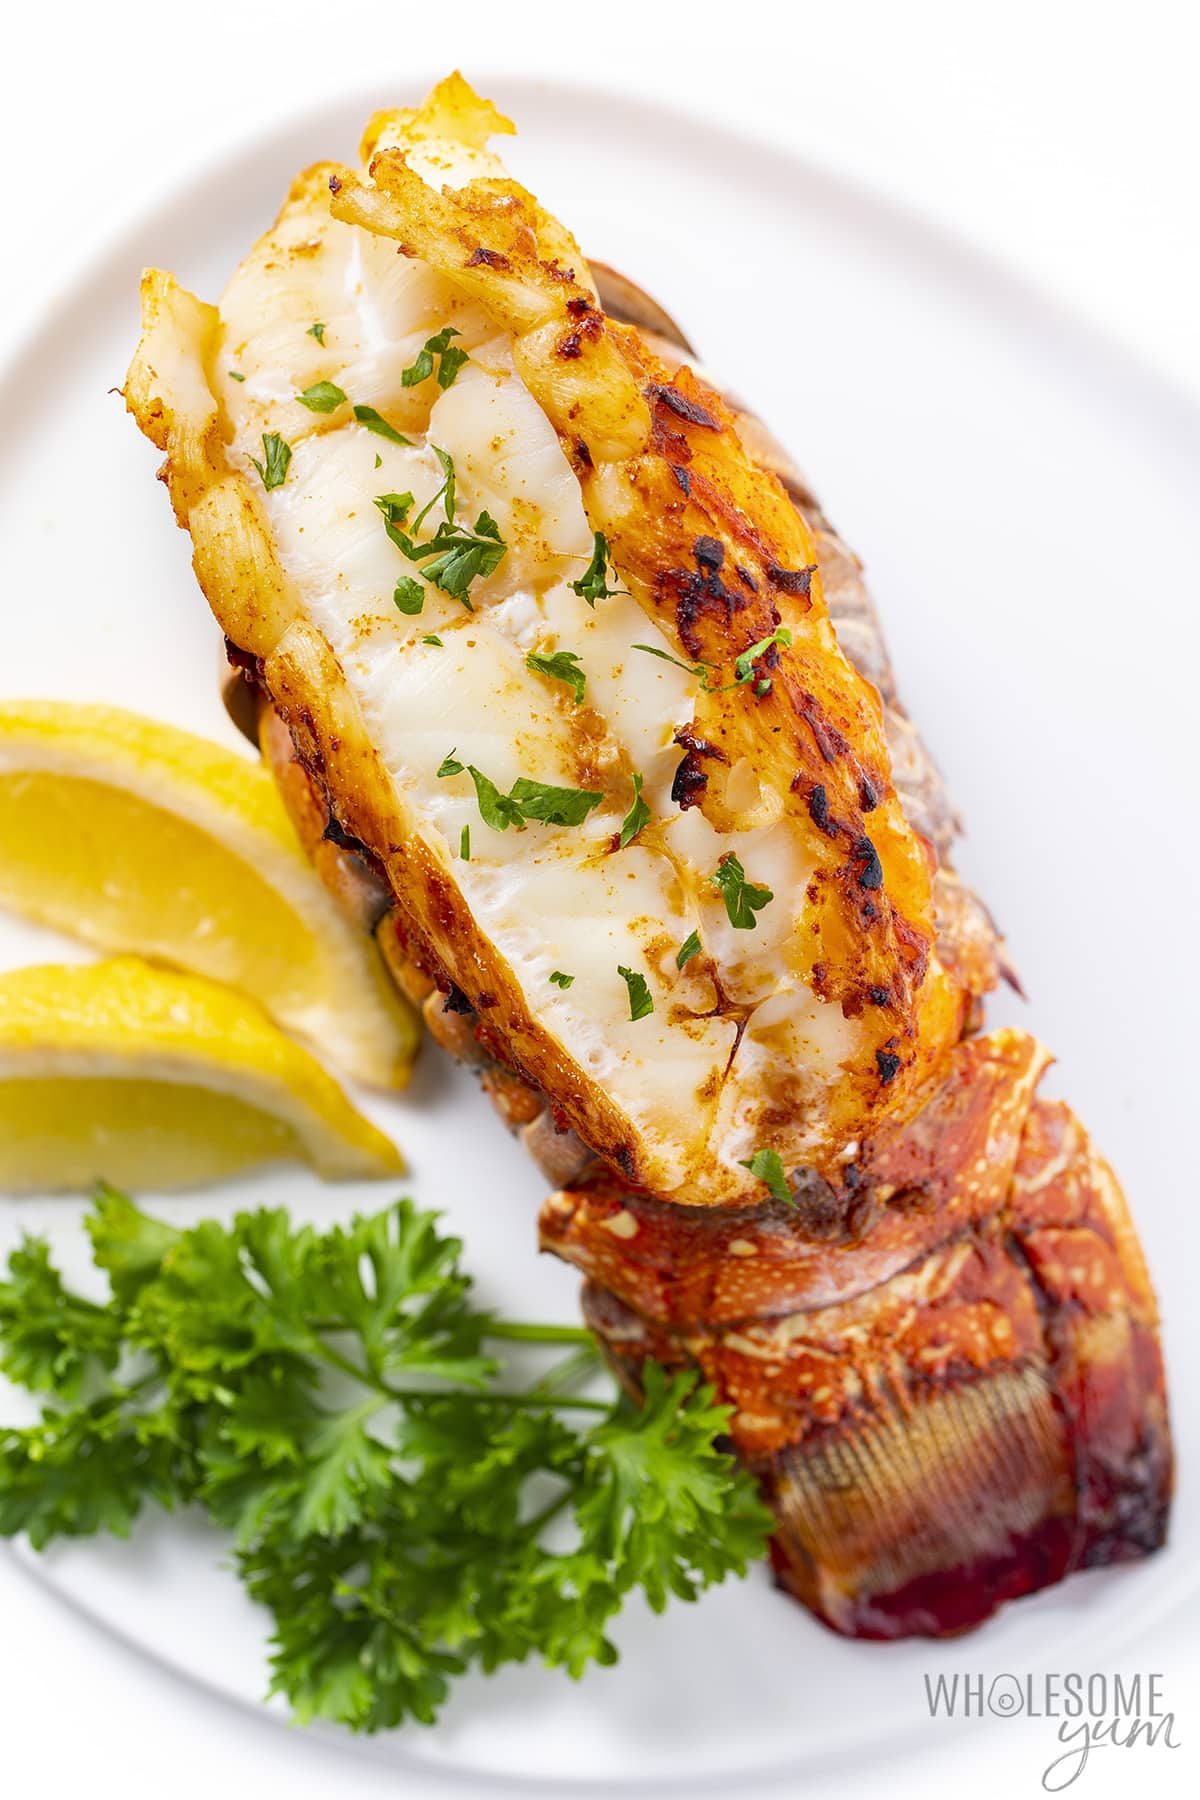 Broiled lobster tail on a plate.